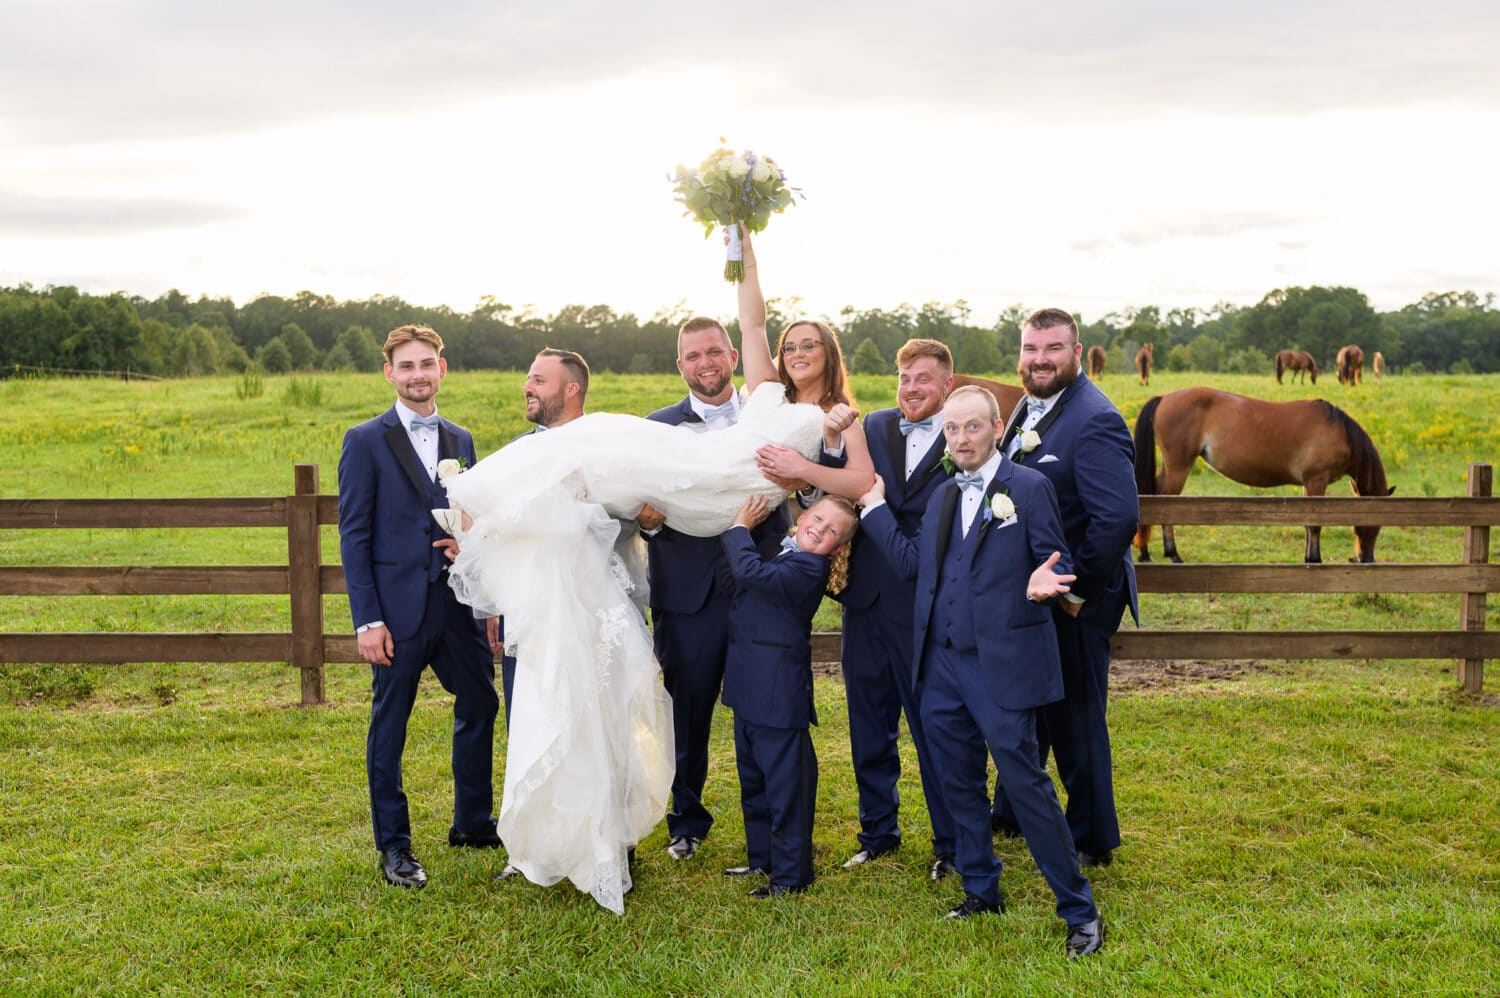 Groomsmen lifting bride into the air - Wildhorse at Parker Farms